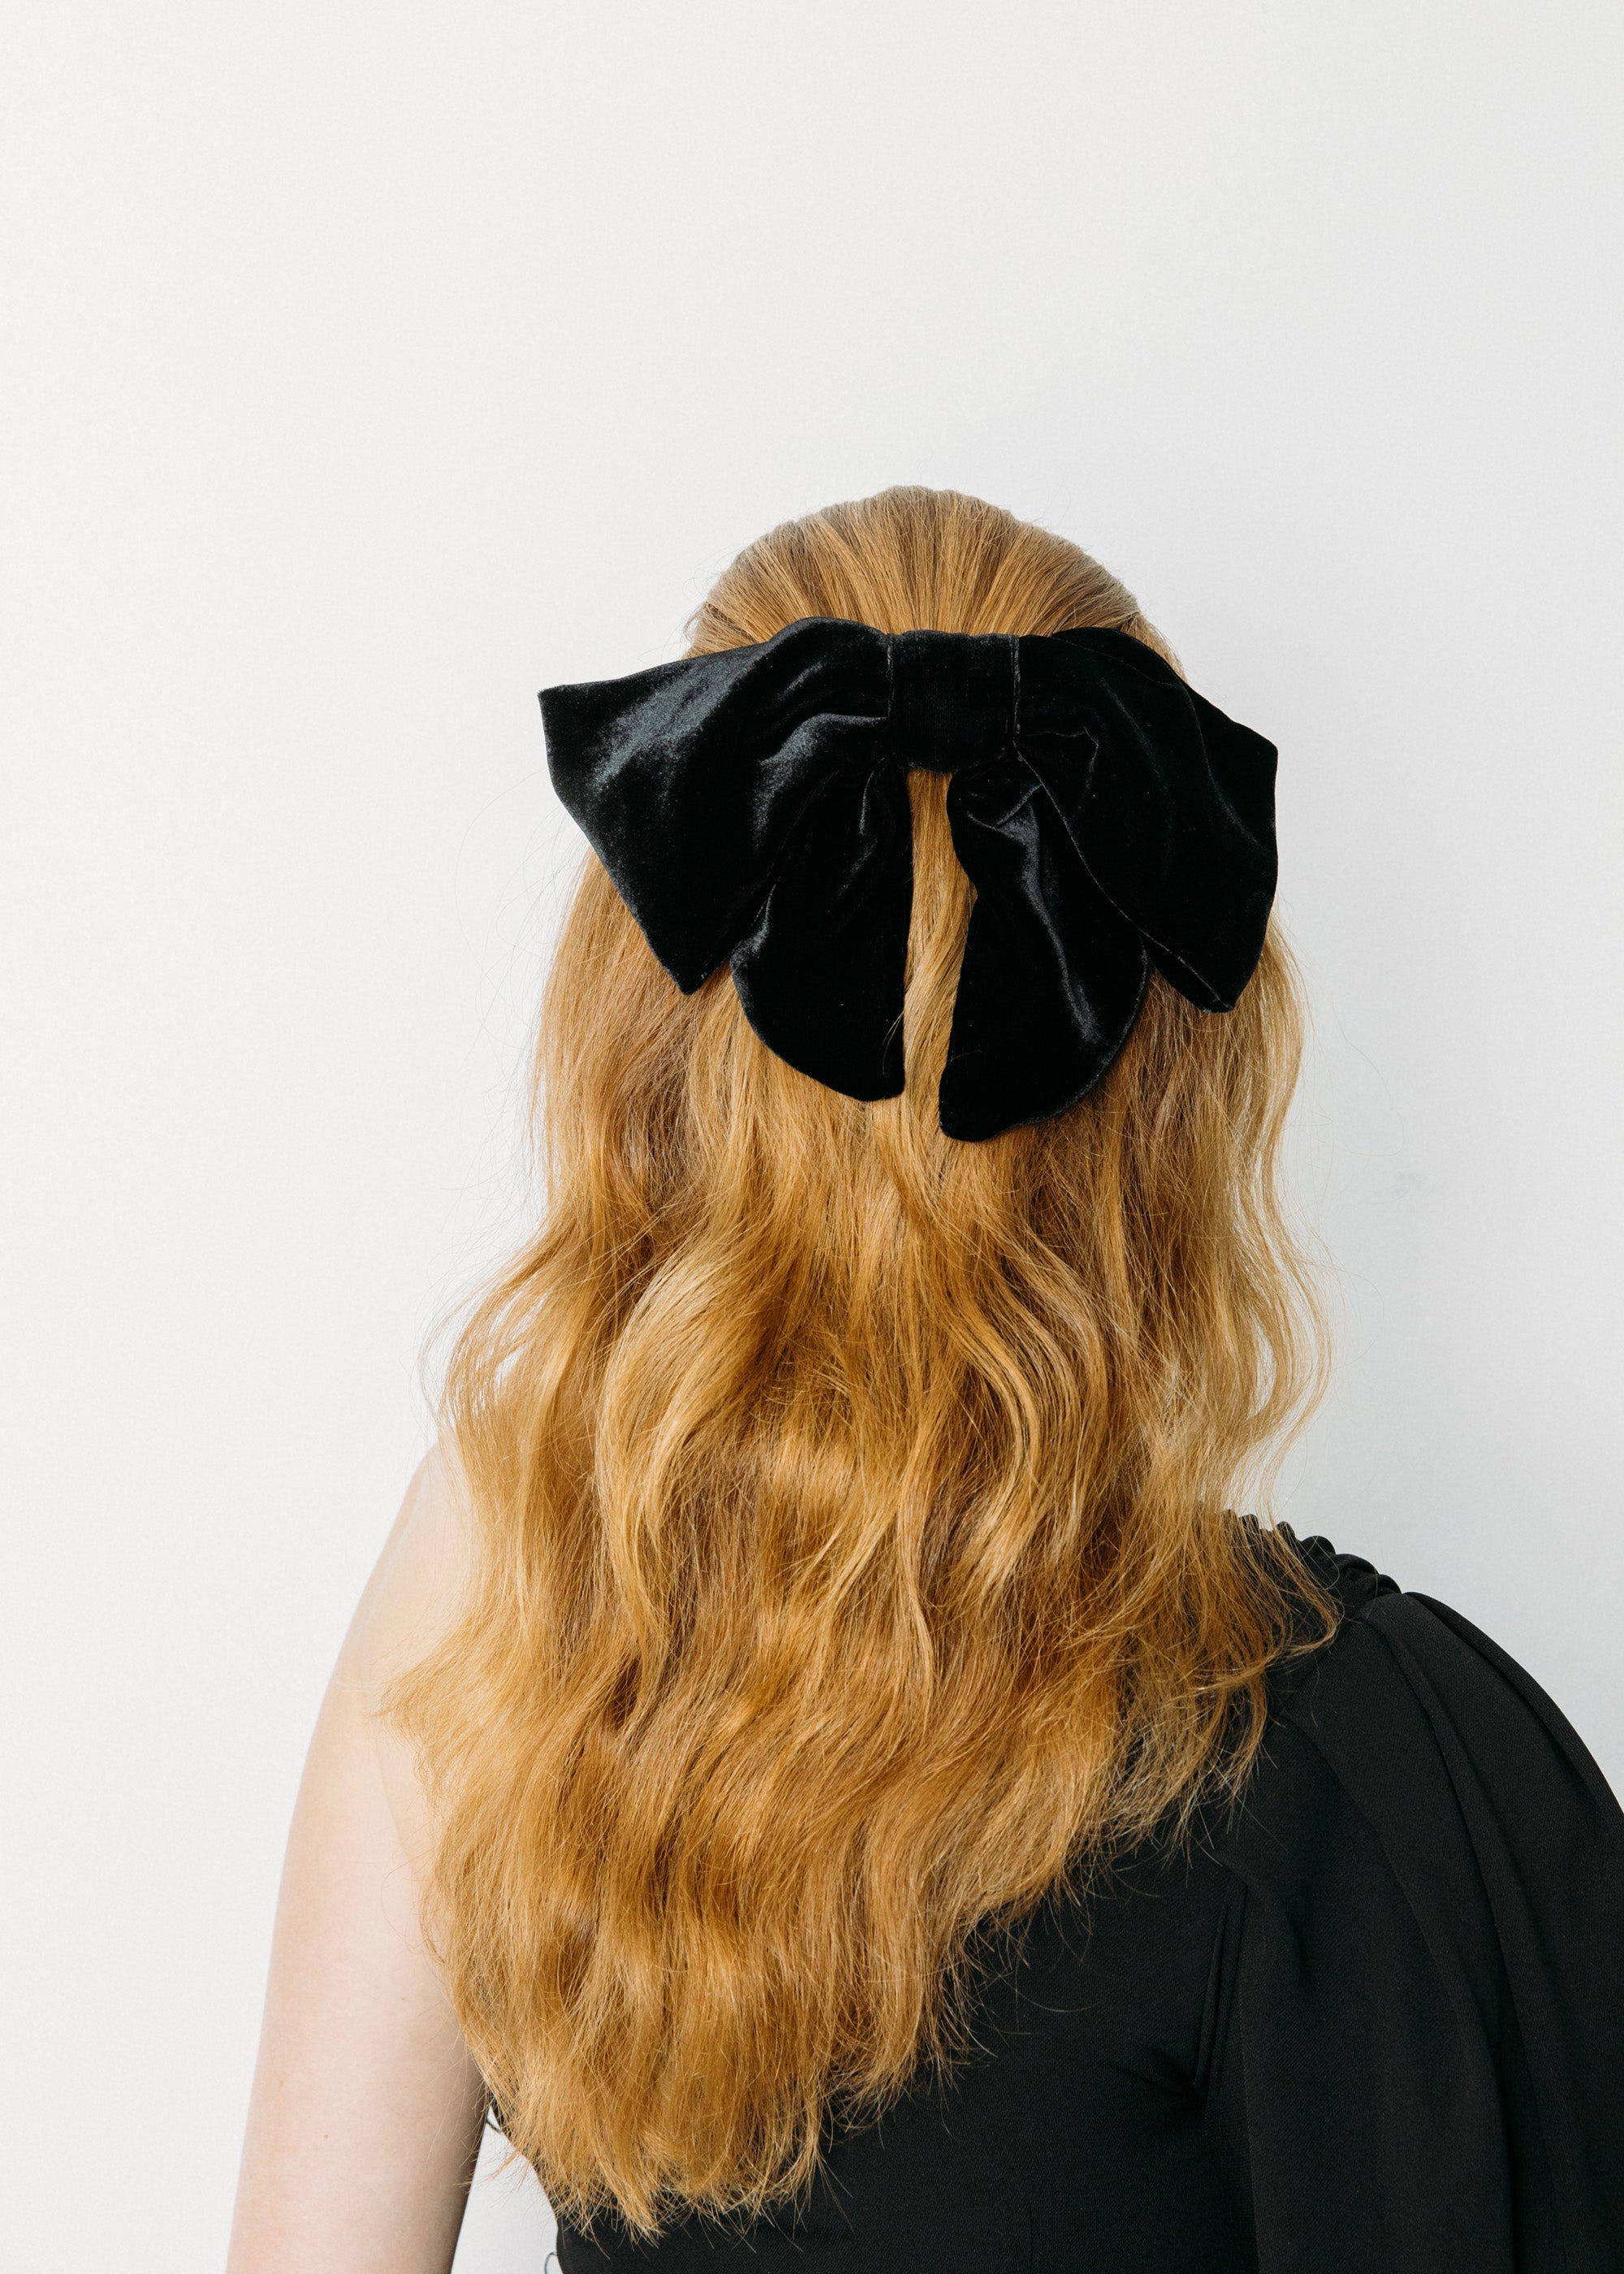 Celine Launches Headband Which Is Set To Be The Accessory Of The Season